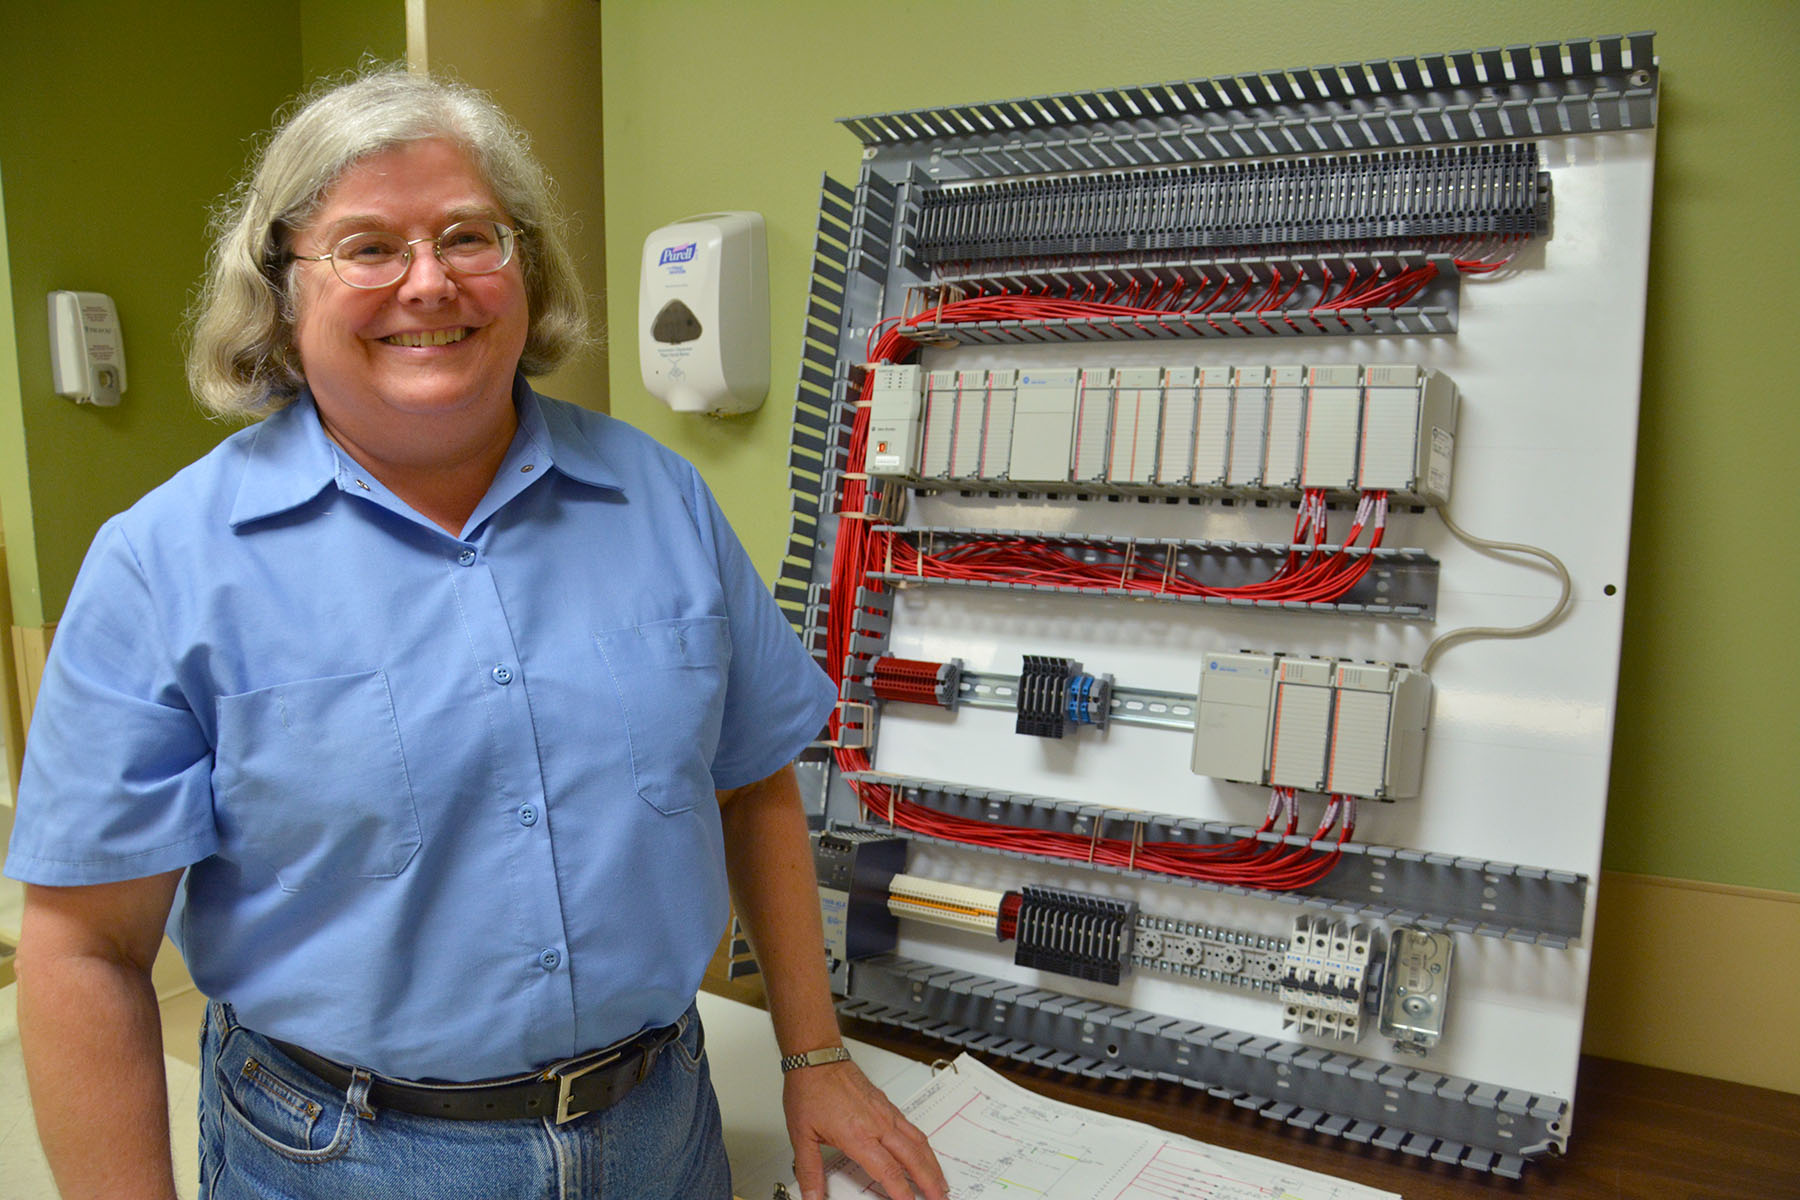 : Shirley Koch of Laurinburg stands beside an industrial panel she worked on for Pittman Electrical Inc. Using the skills she learned in the NCCER Electrical Apprenticeship program offered through Richmond Community College, Koch installed and wired all the components on the panel that will be used by Railroad Friction Products.